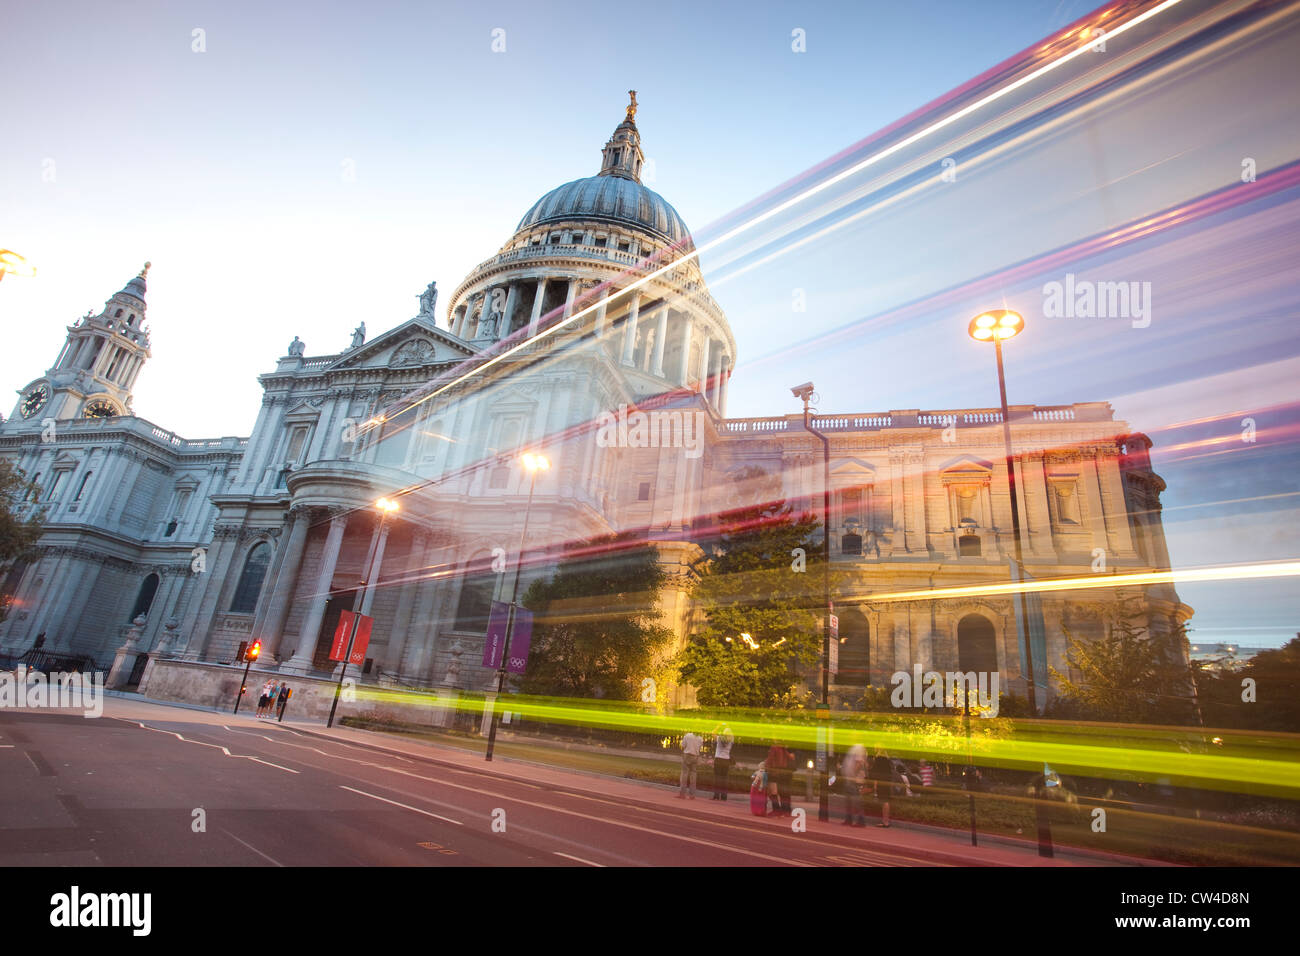 St Paul's Cathedral at dusk, Central London, England, United Kingdom Stock Photo